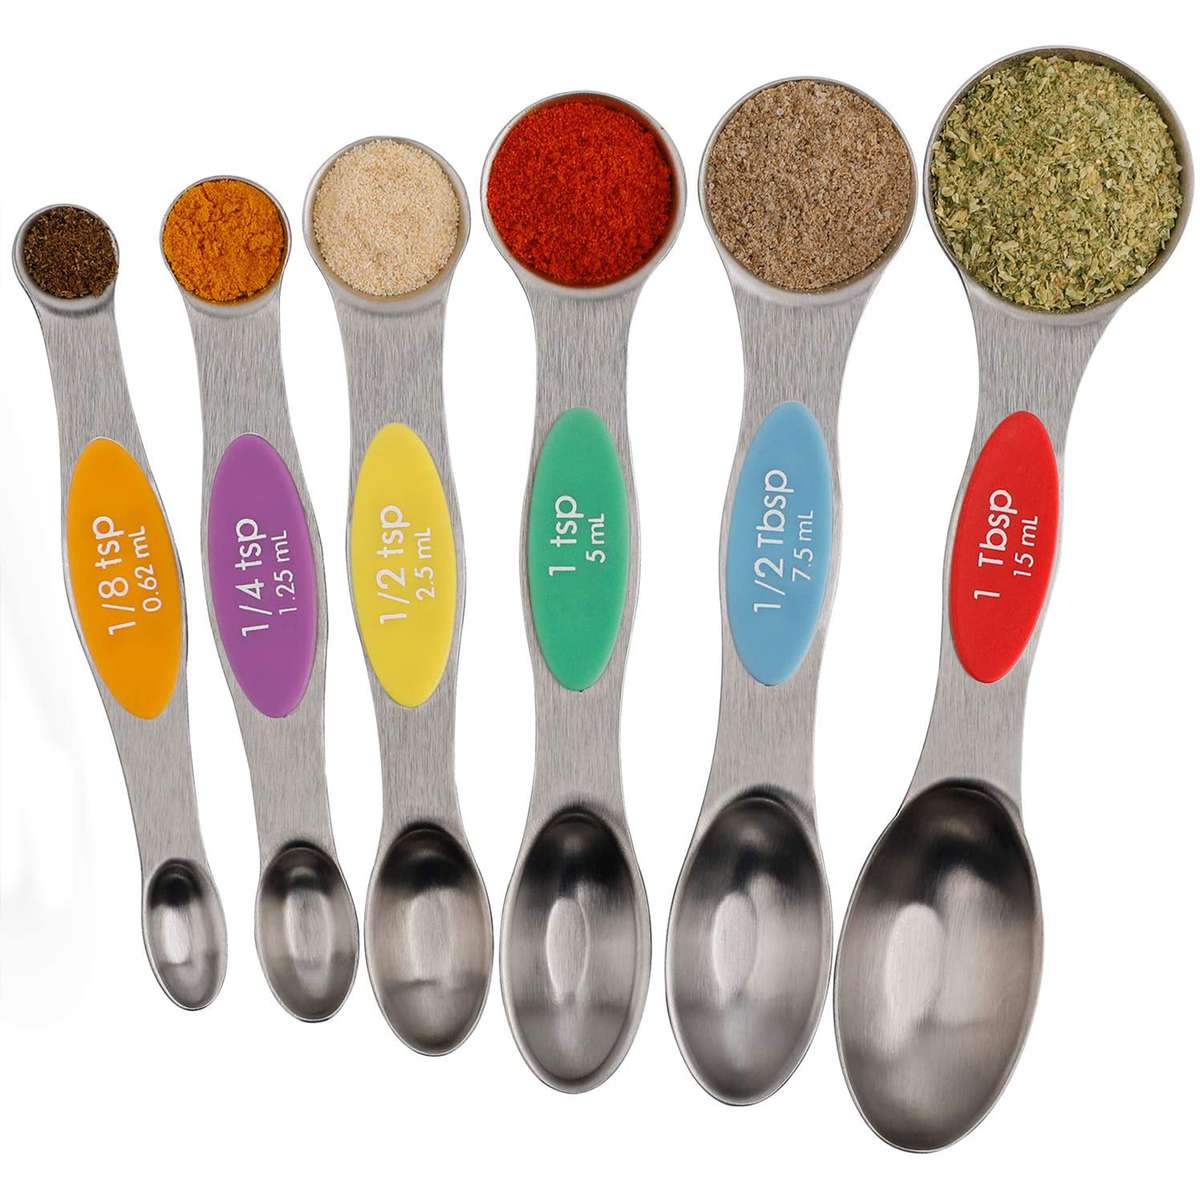 5pc Magnetic Measuring Spoons Double Ends Stainless Steel Teaspoon Tablespoon nv